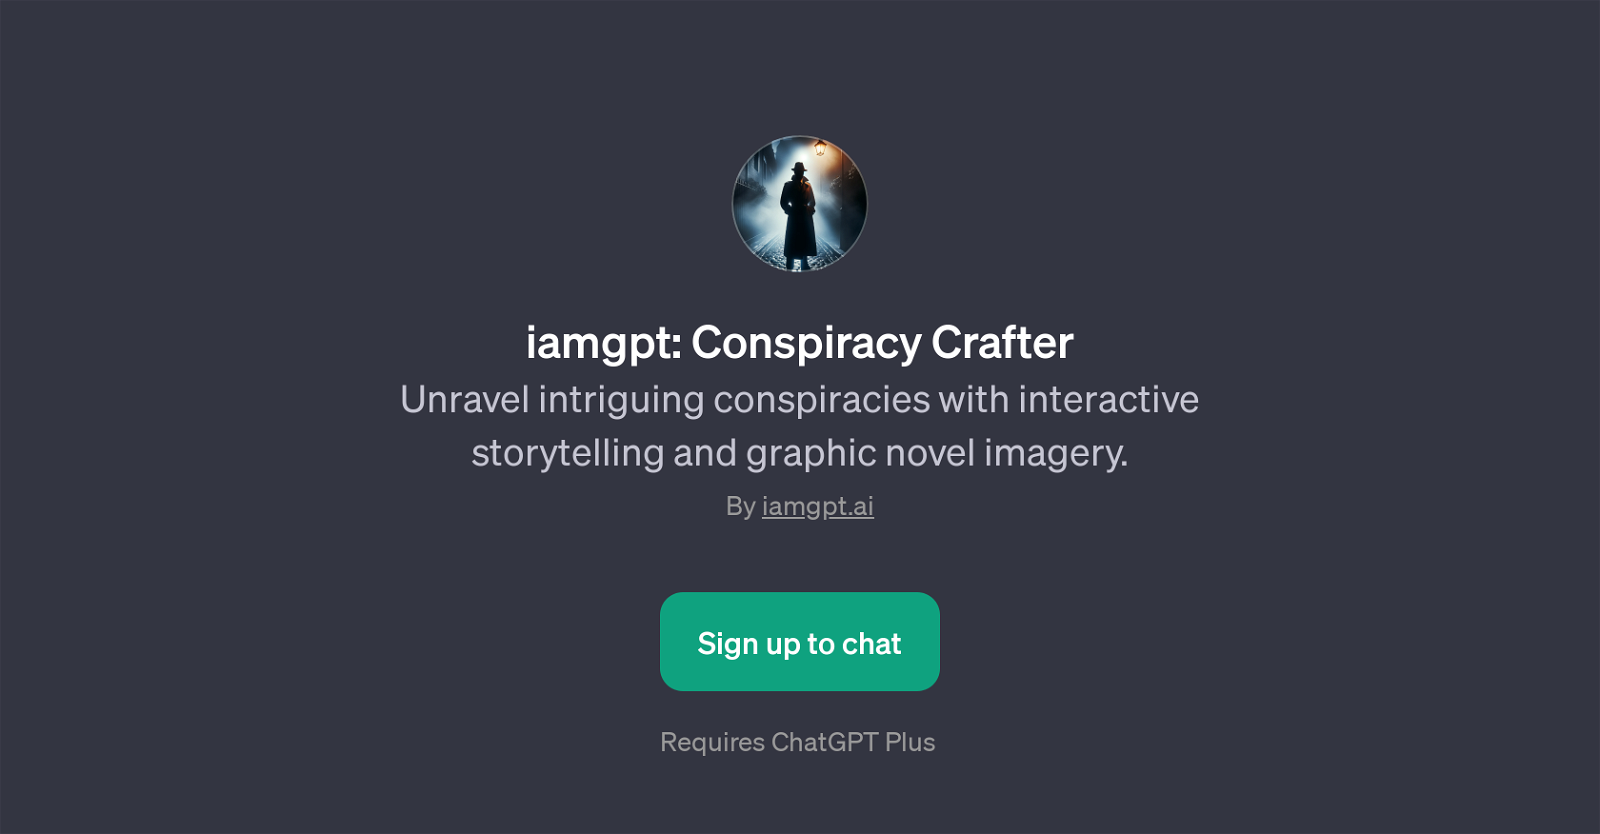 iamgpt: Conspiracy Crafter website